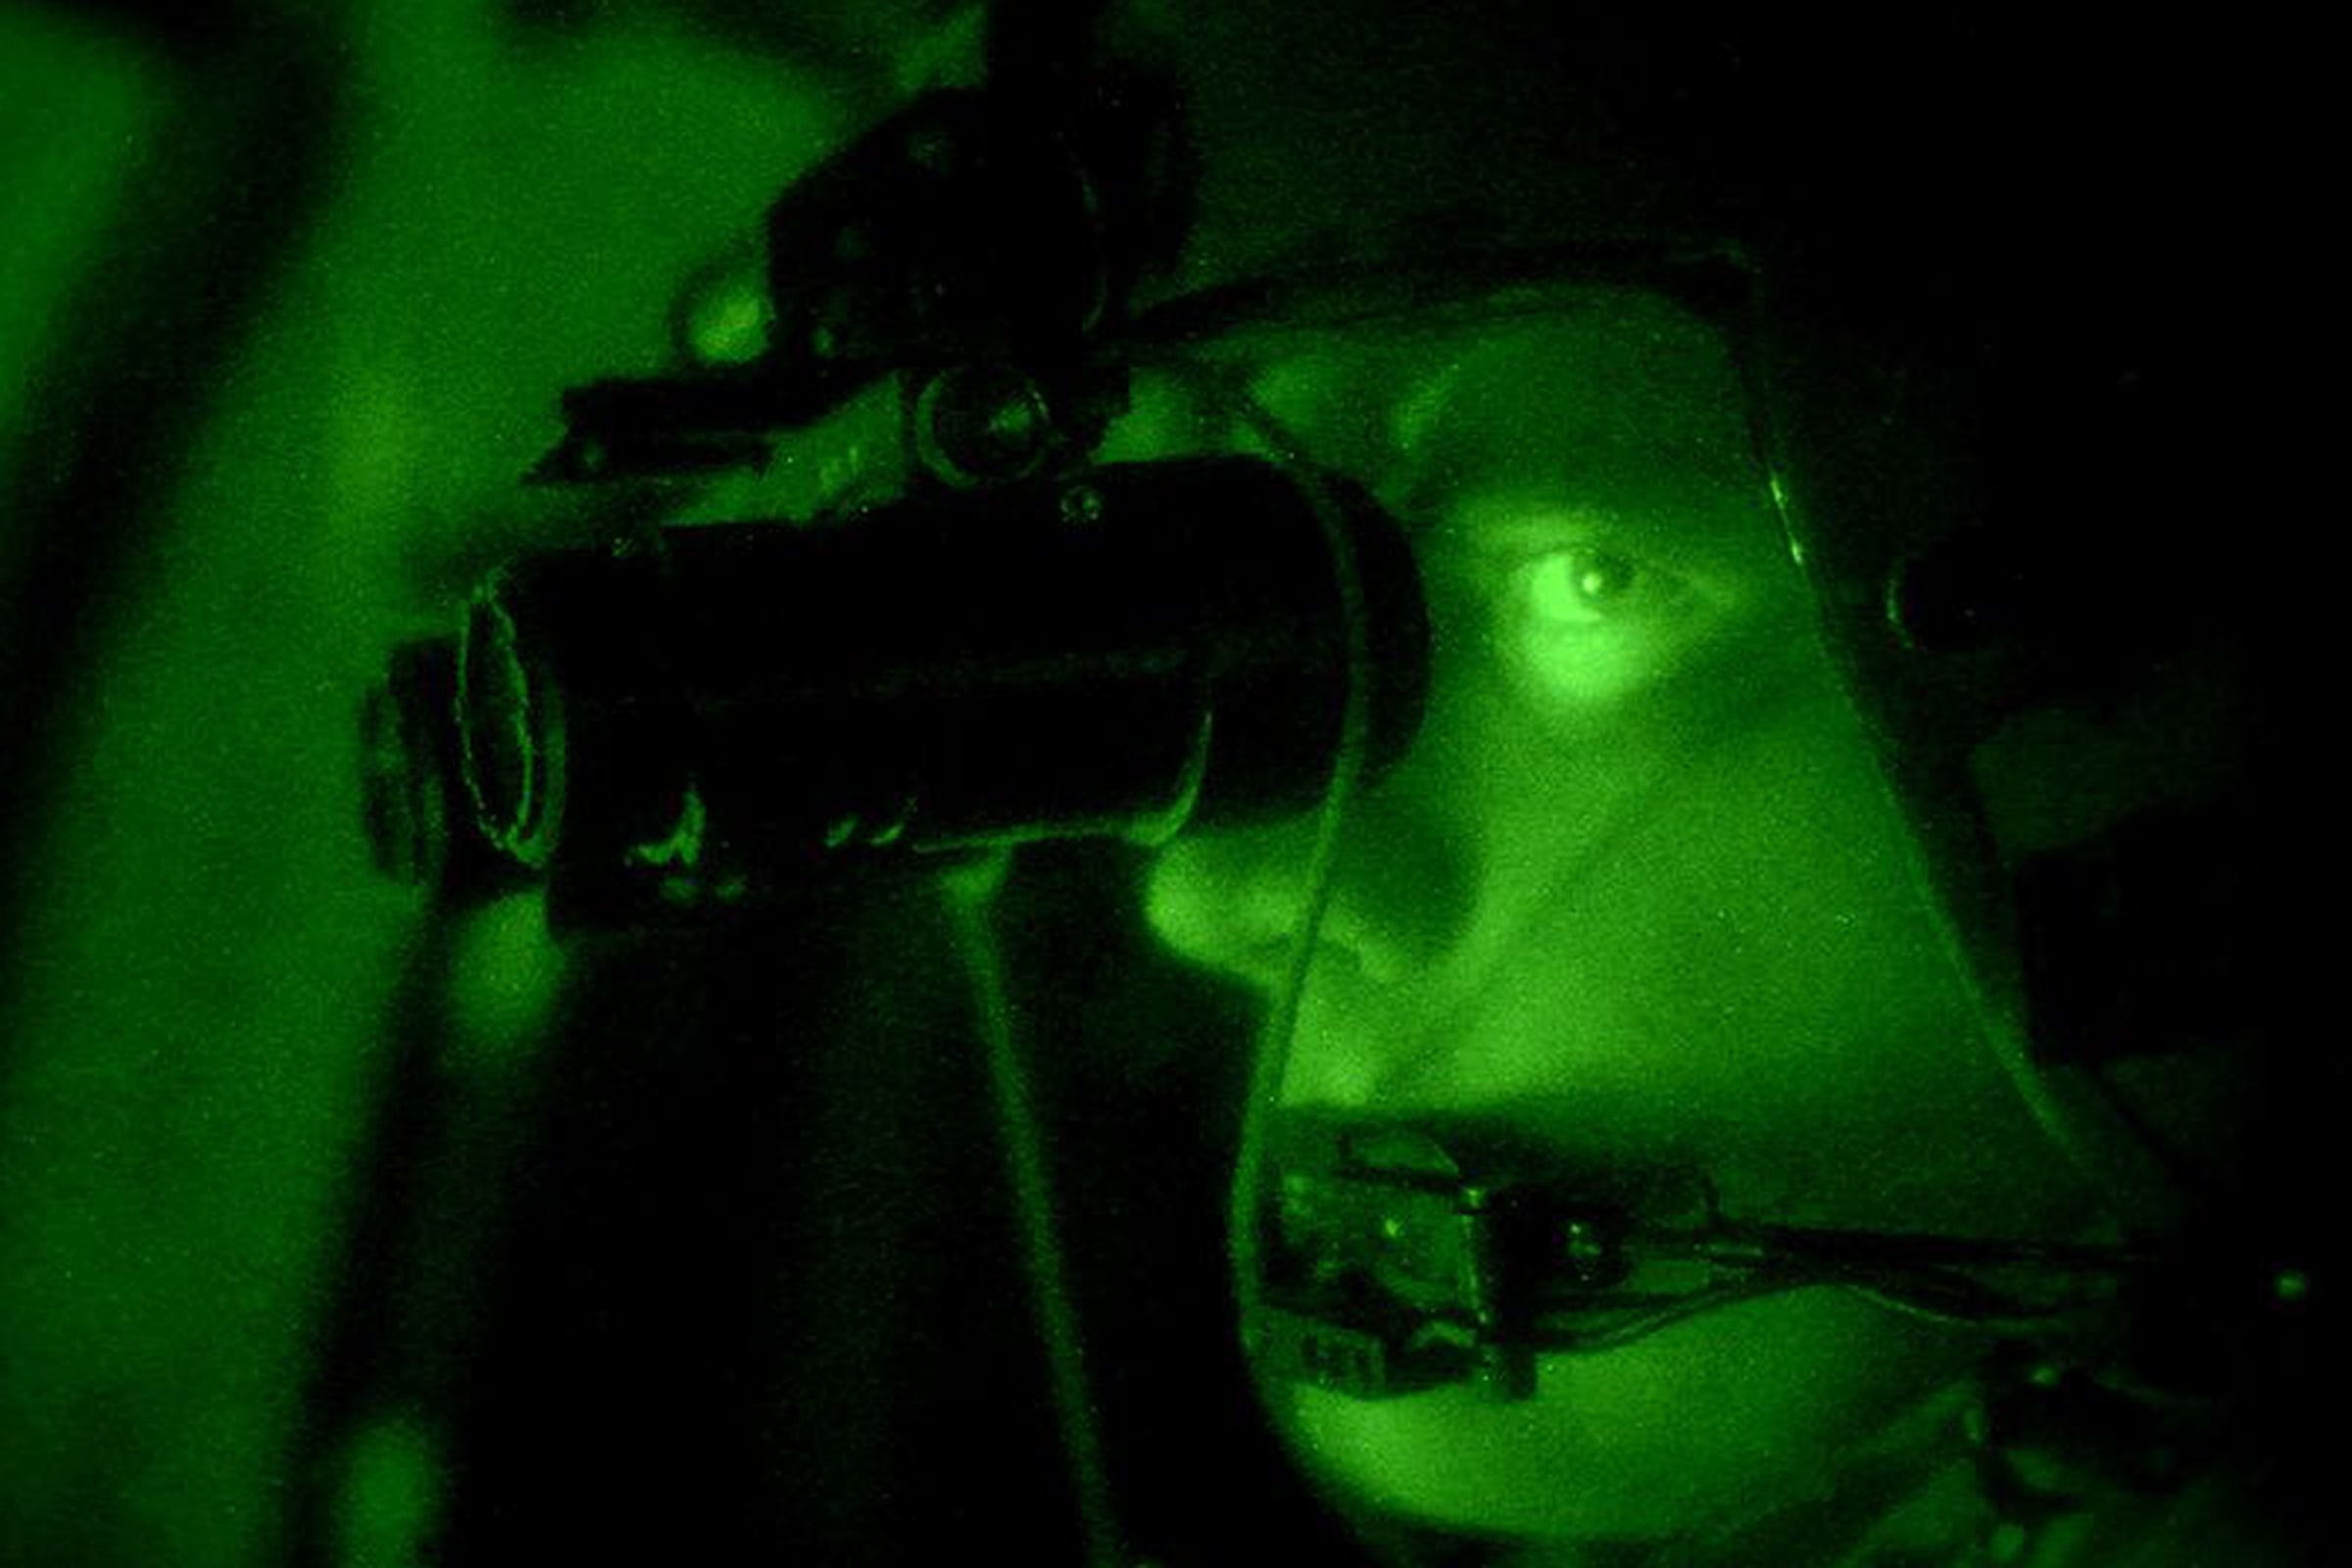 Night Vision goggles (Wikimedia commons)